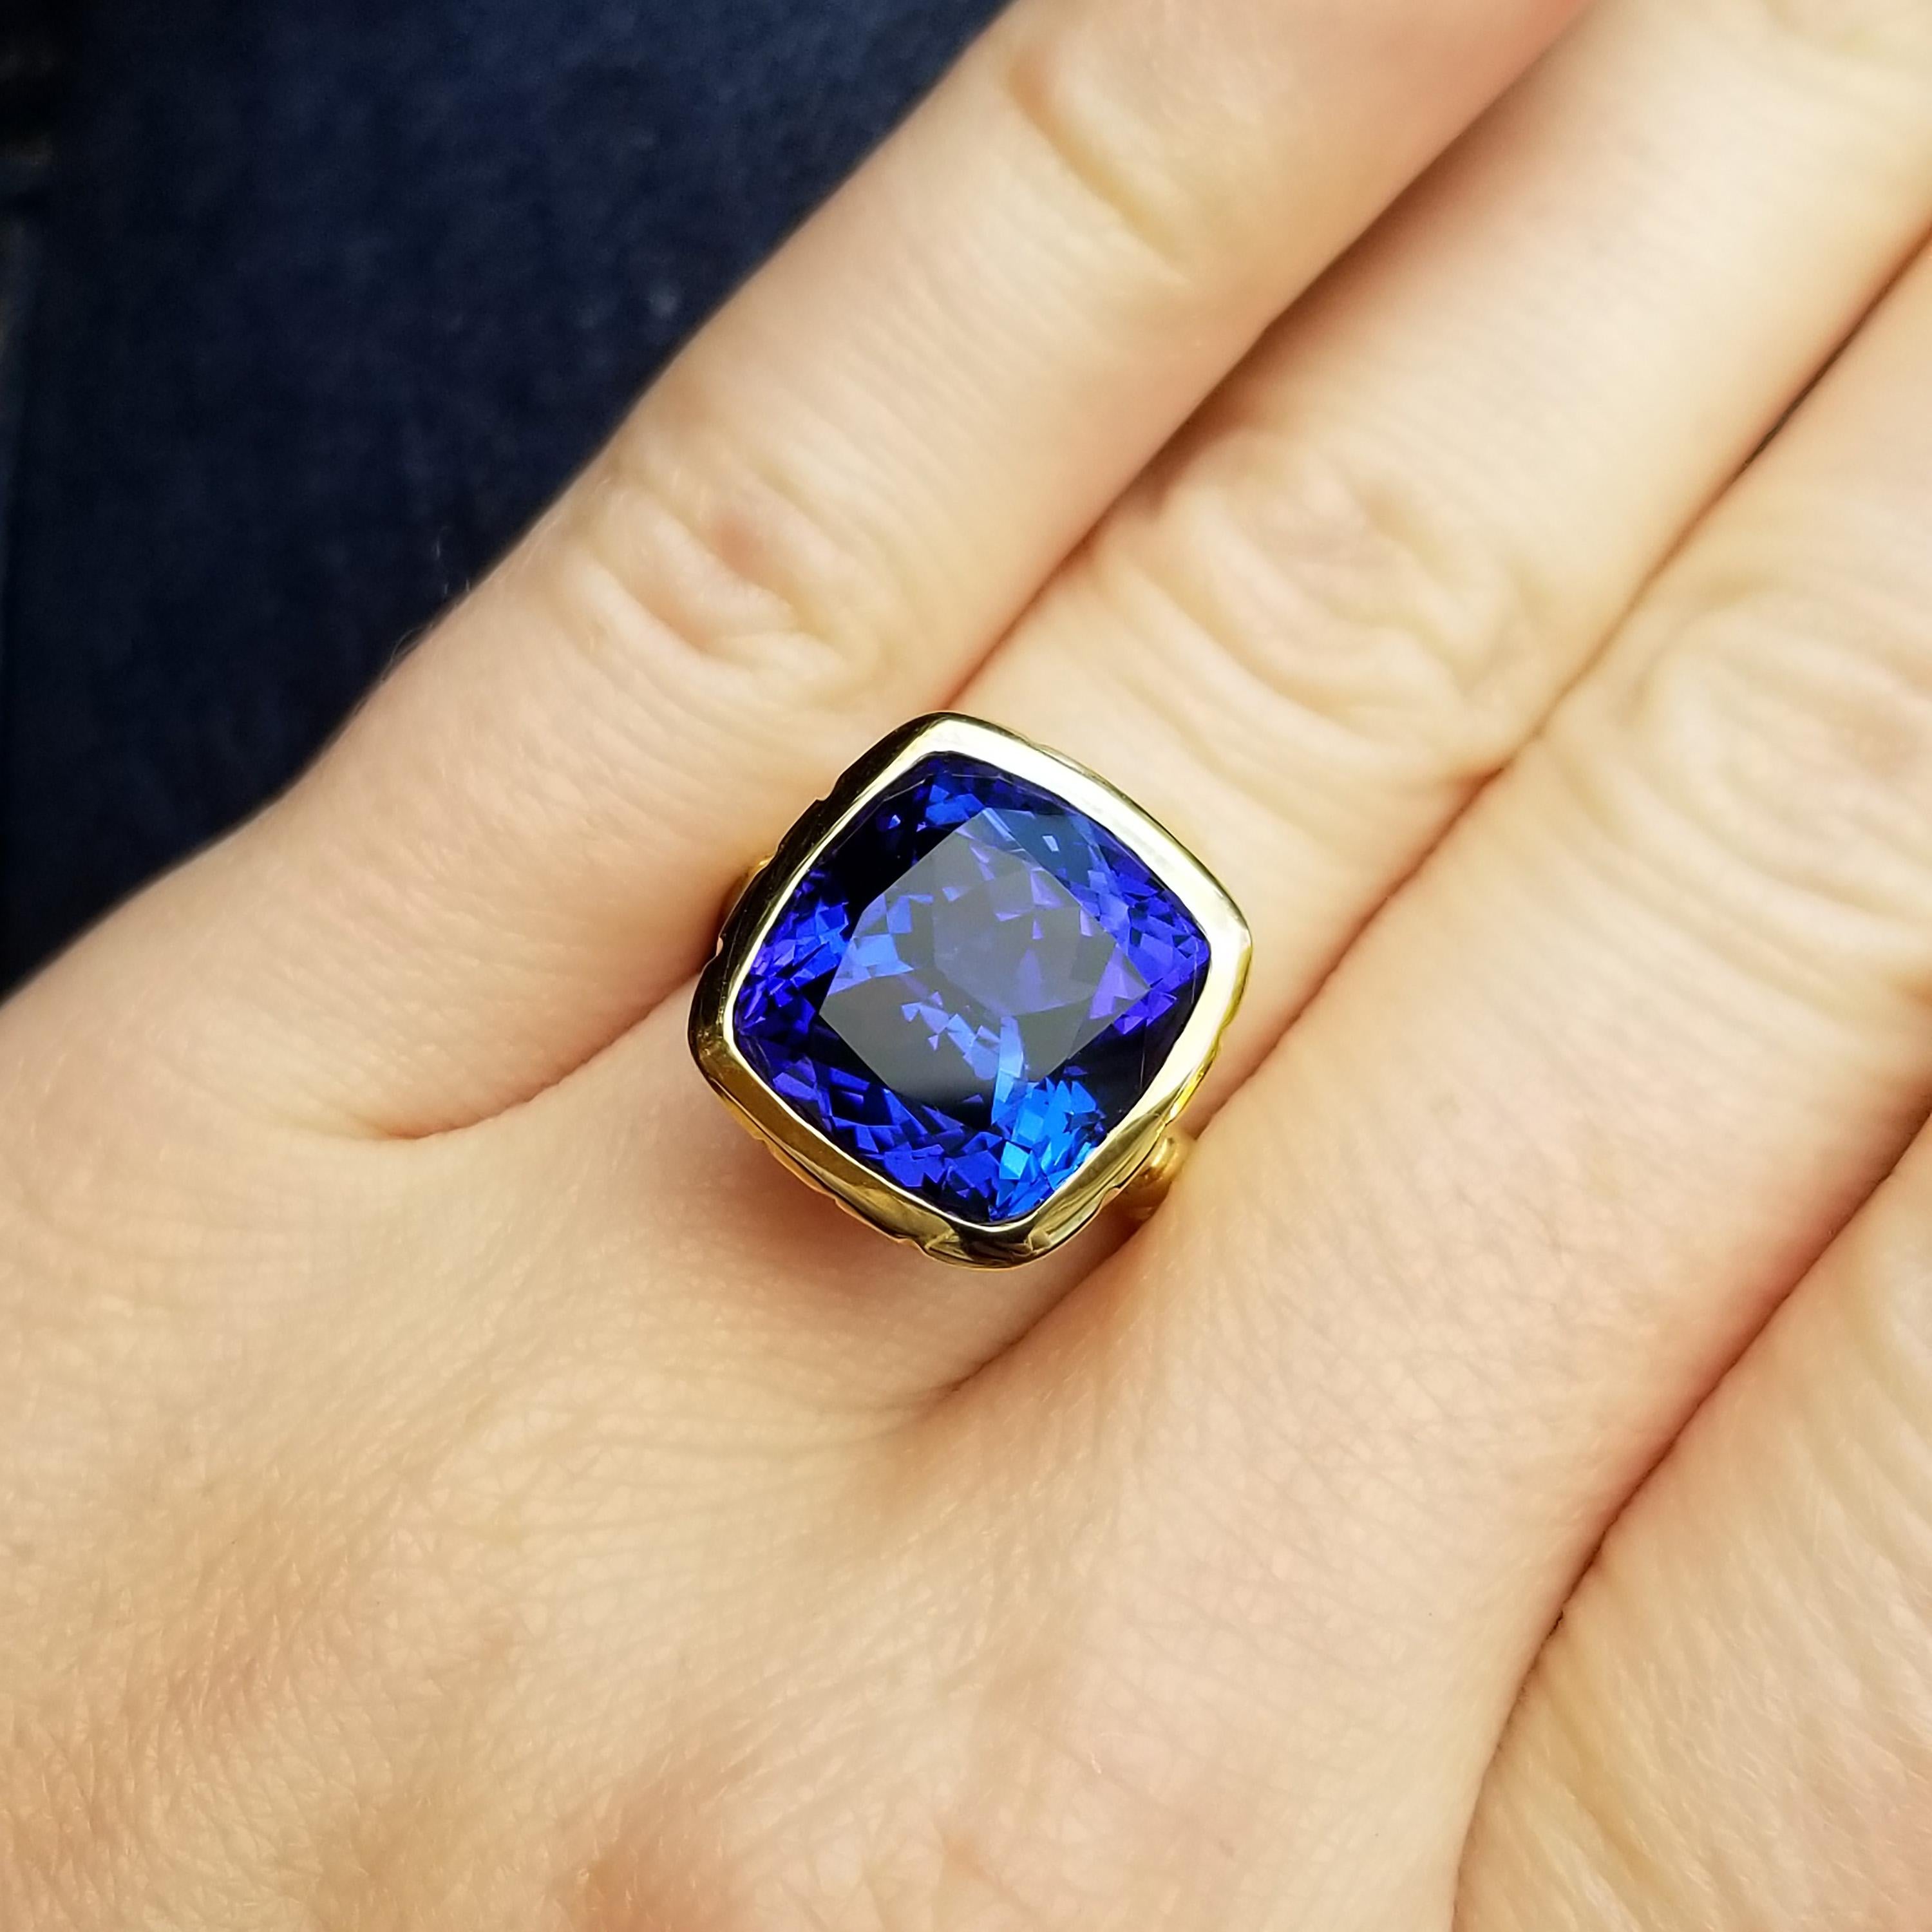 This sumptuous 10.52ct tanzanite is an exceptional specimen. The Tanzanian gem reveals pleochroism with intensely deep blue as well as rich purple each becoming apparent as you tilt this lovely ring back and forth. Additional flashes of red add